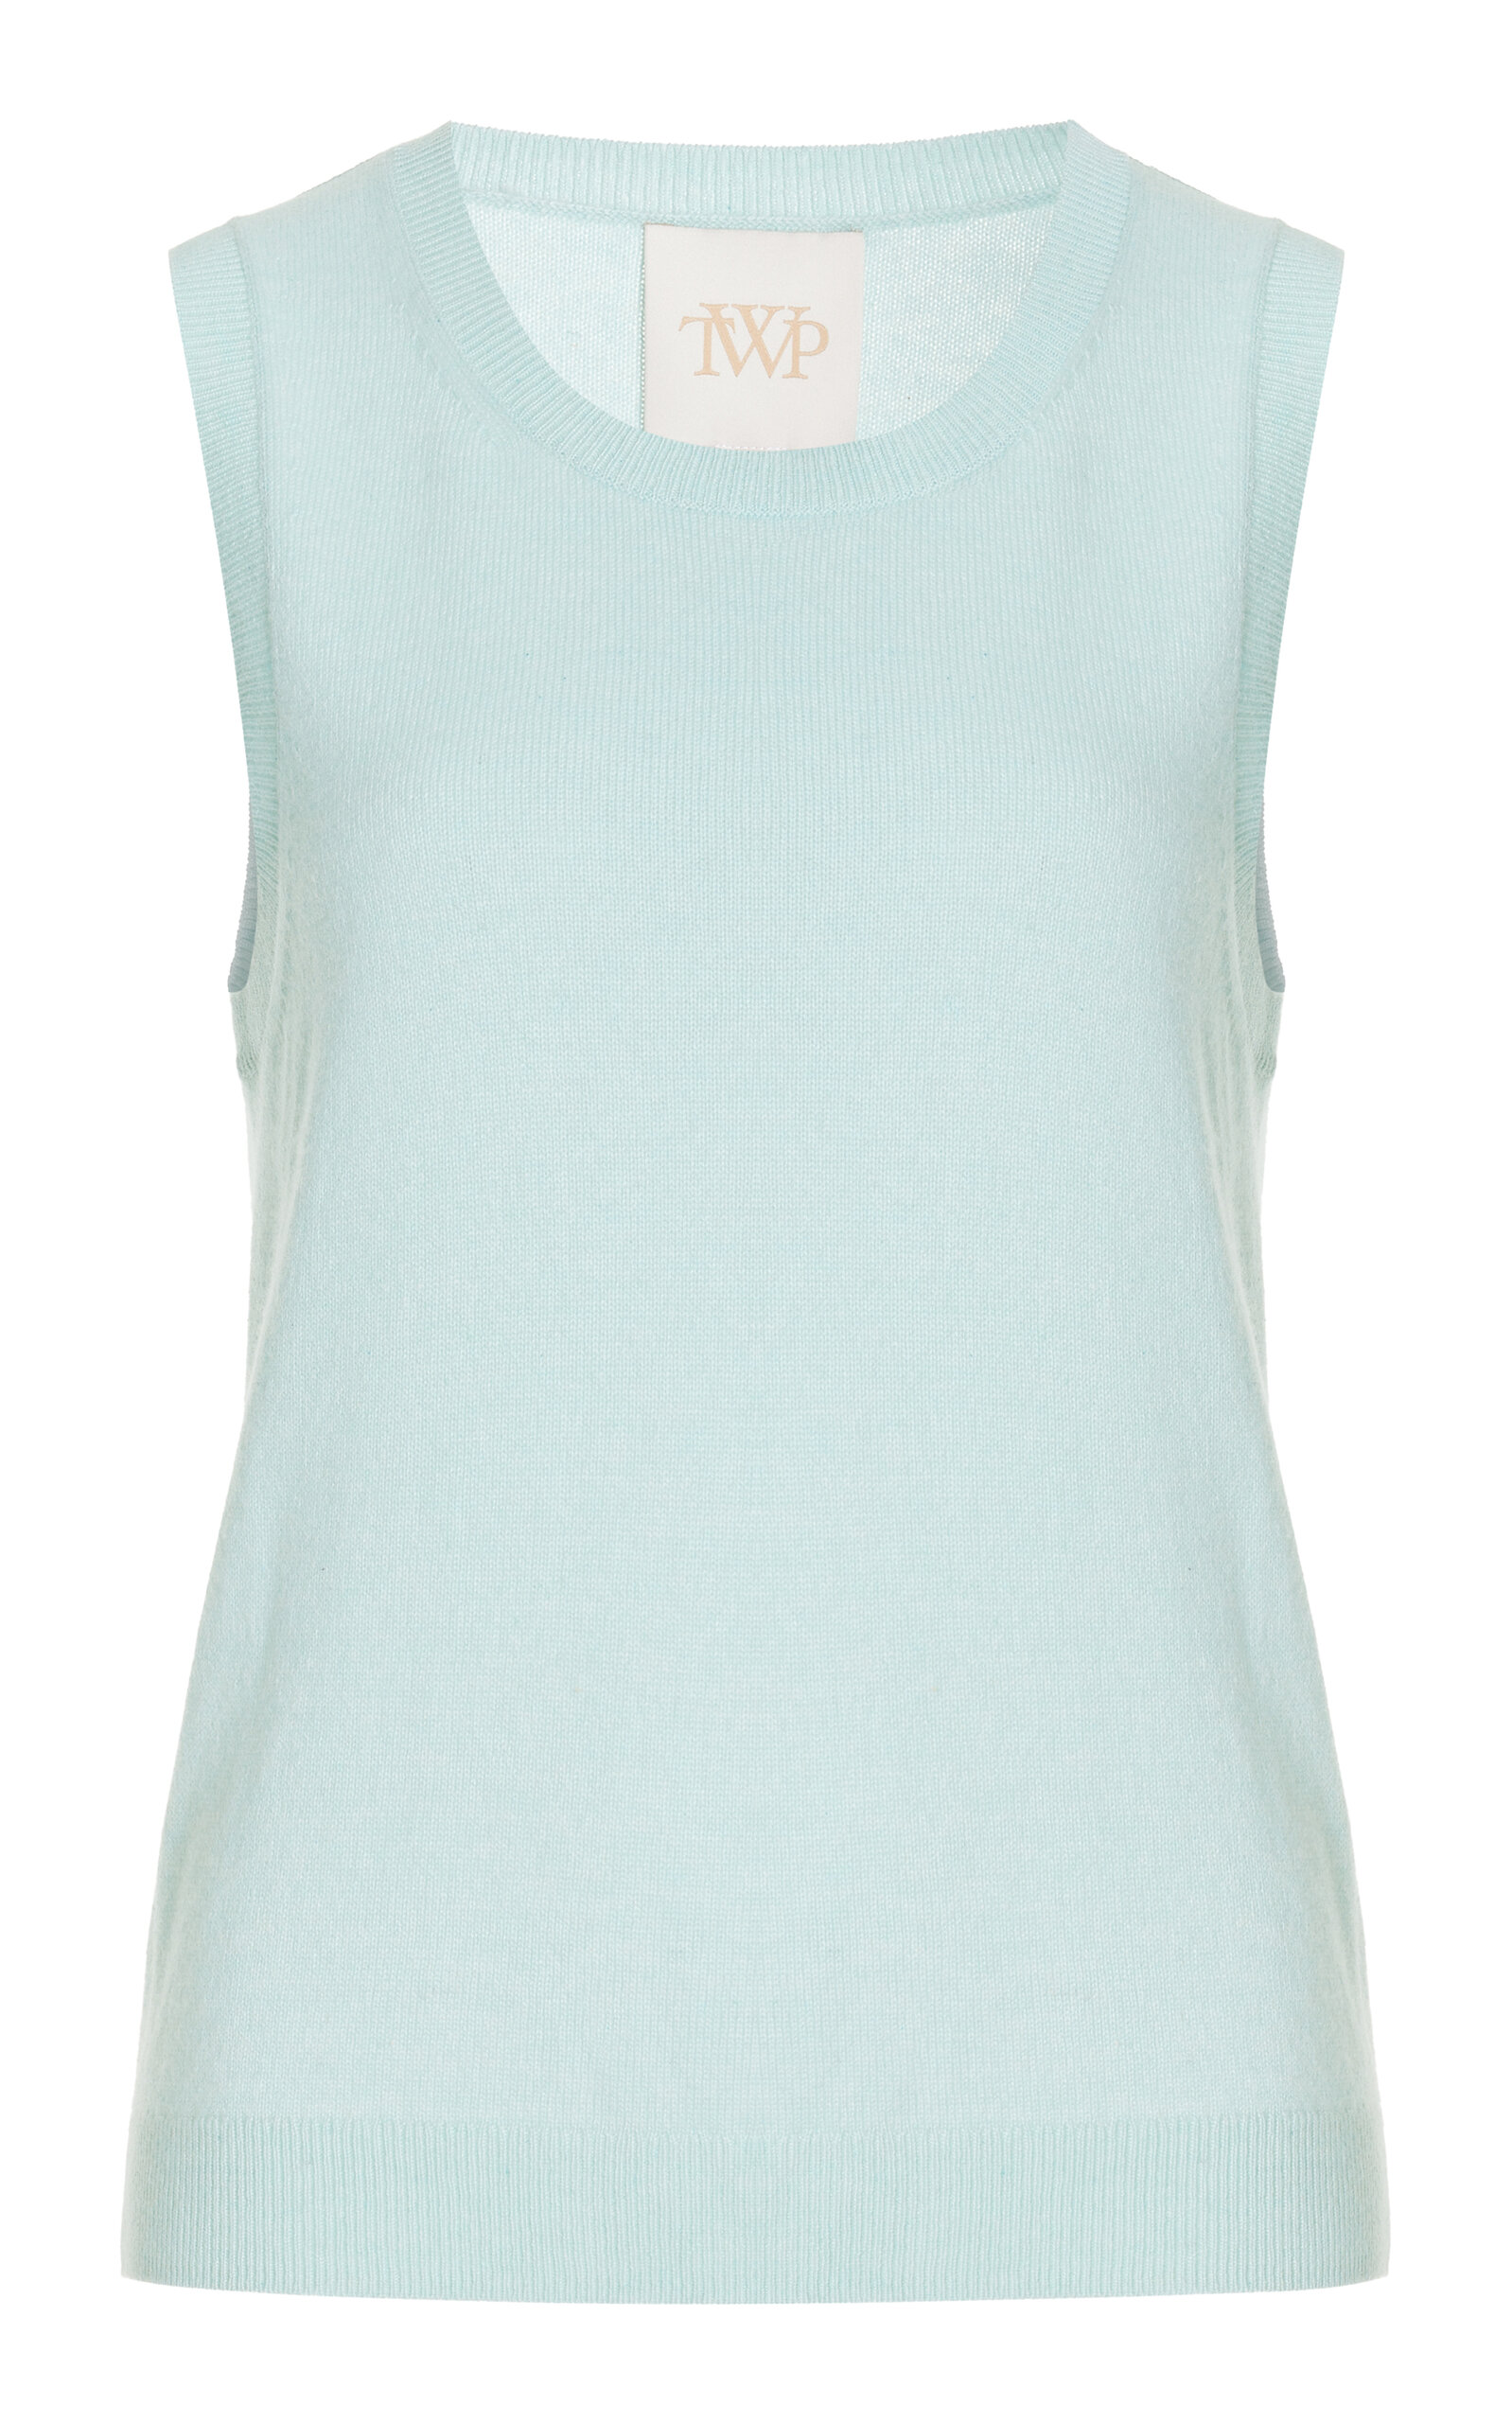 Twp Jenny's Cashmere Tank Top In Light Blue